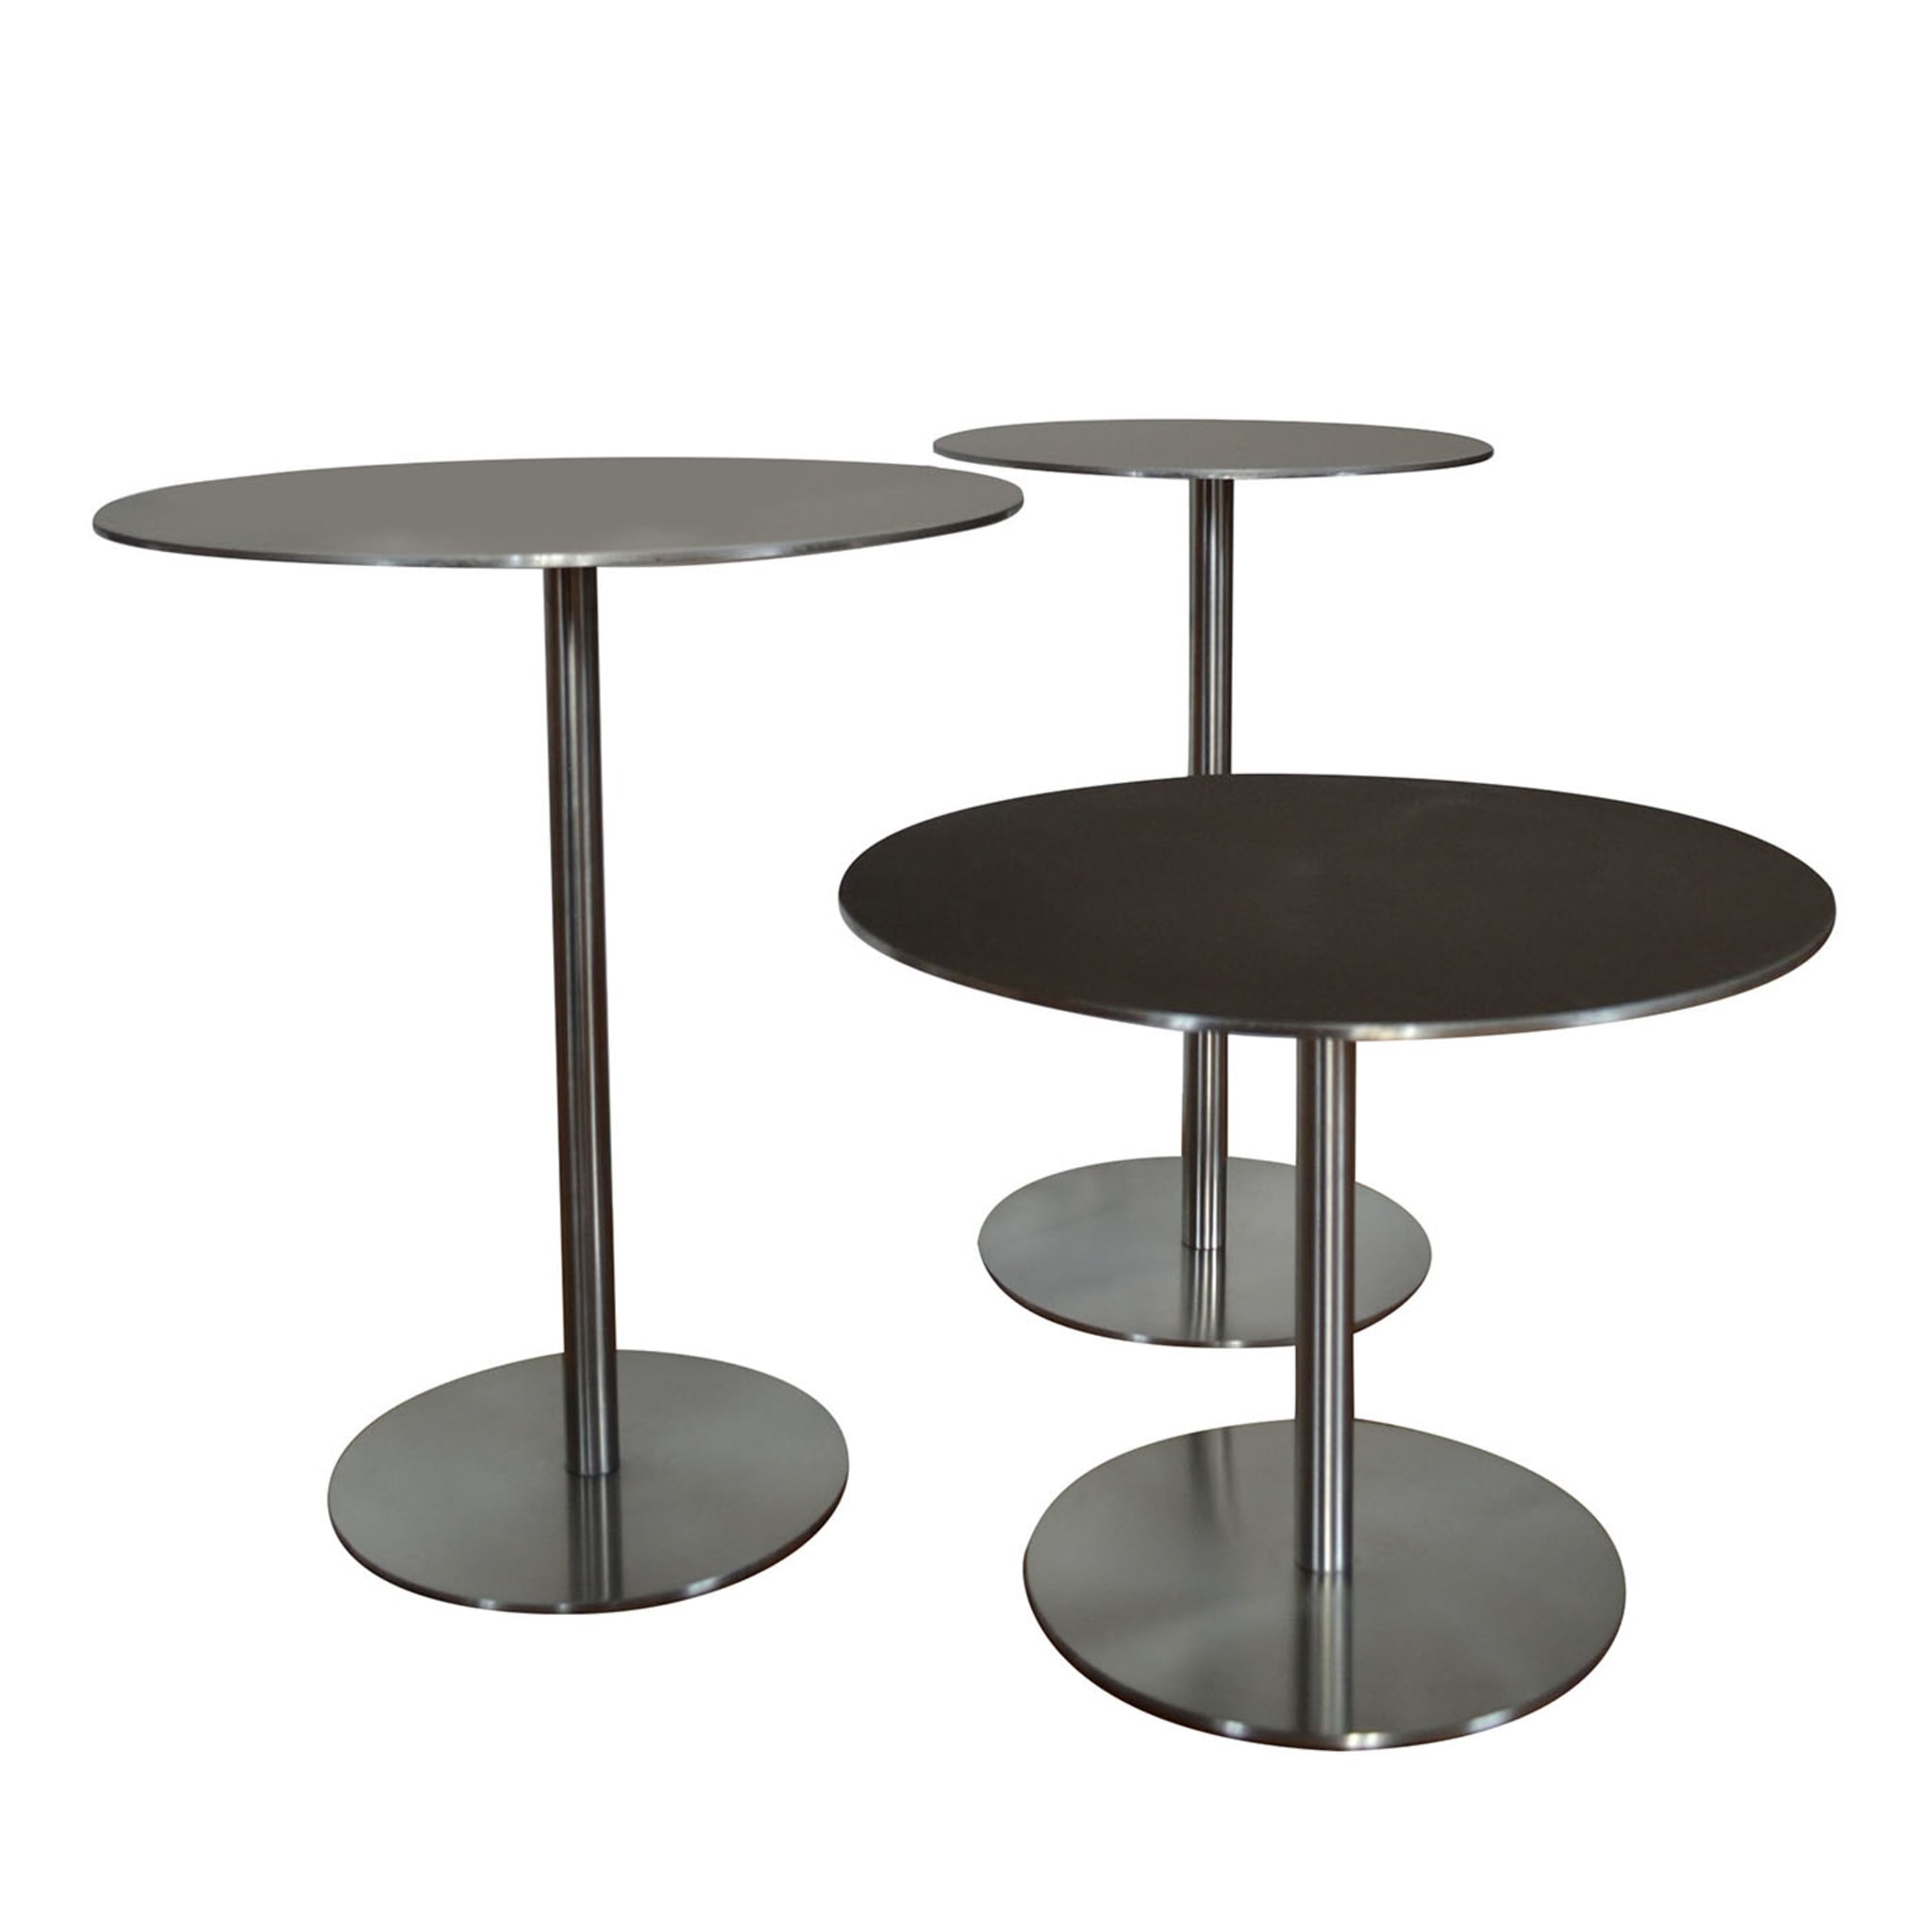 Ester Pece Stainless Steel Table - Alternative view 1